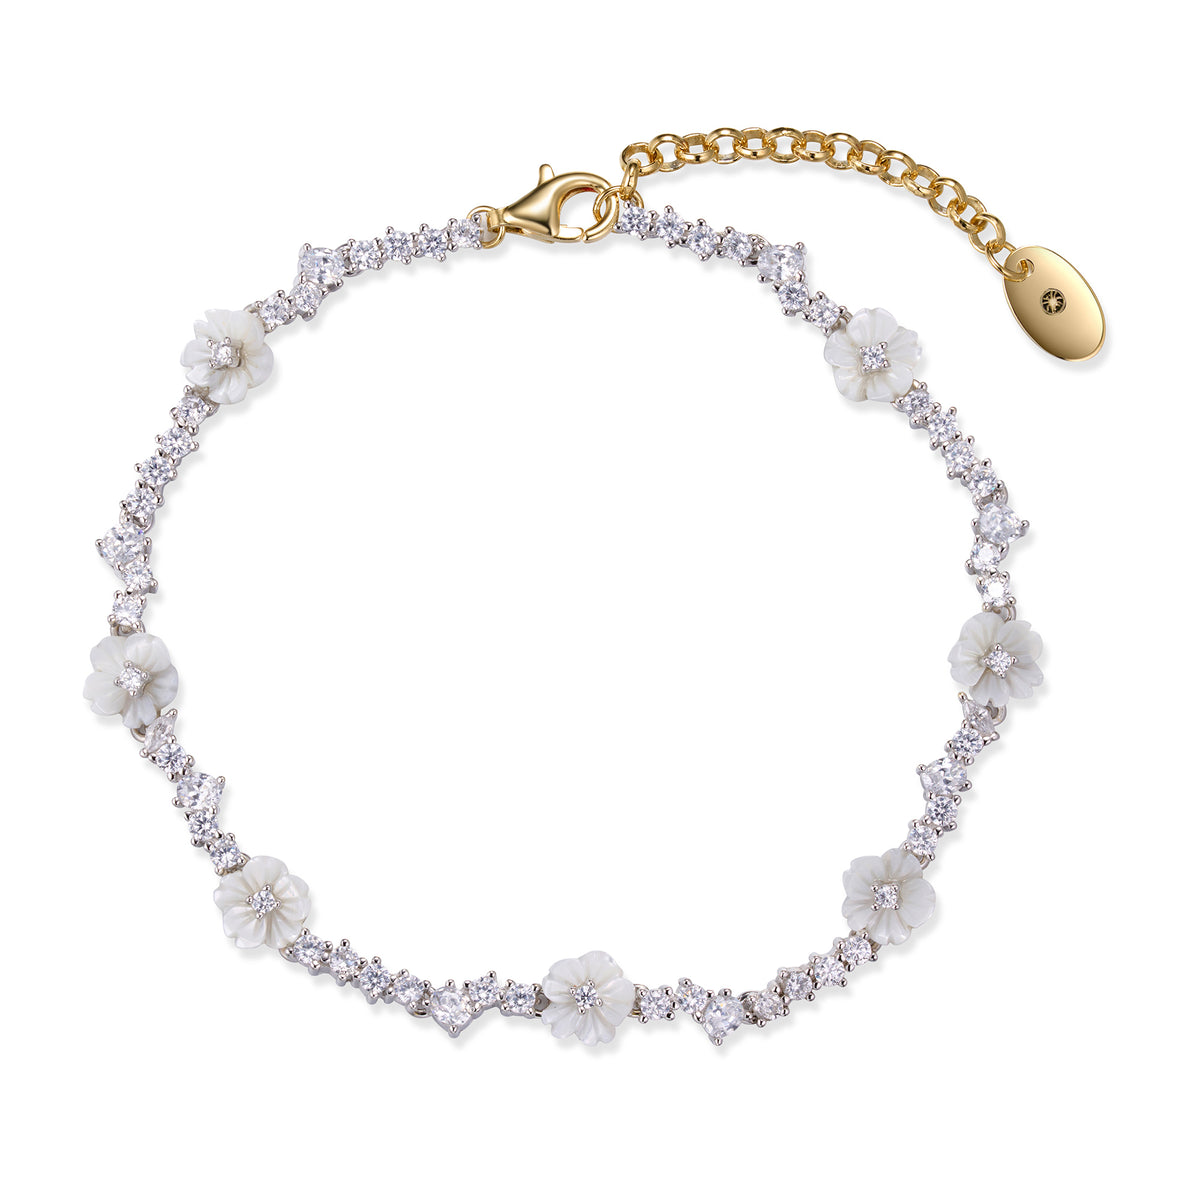 A silver gold plated bracelet with pearls, shell flowers and a pink butterfly charm.